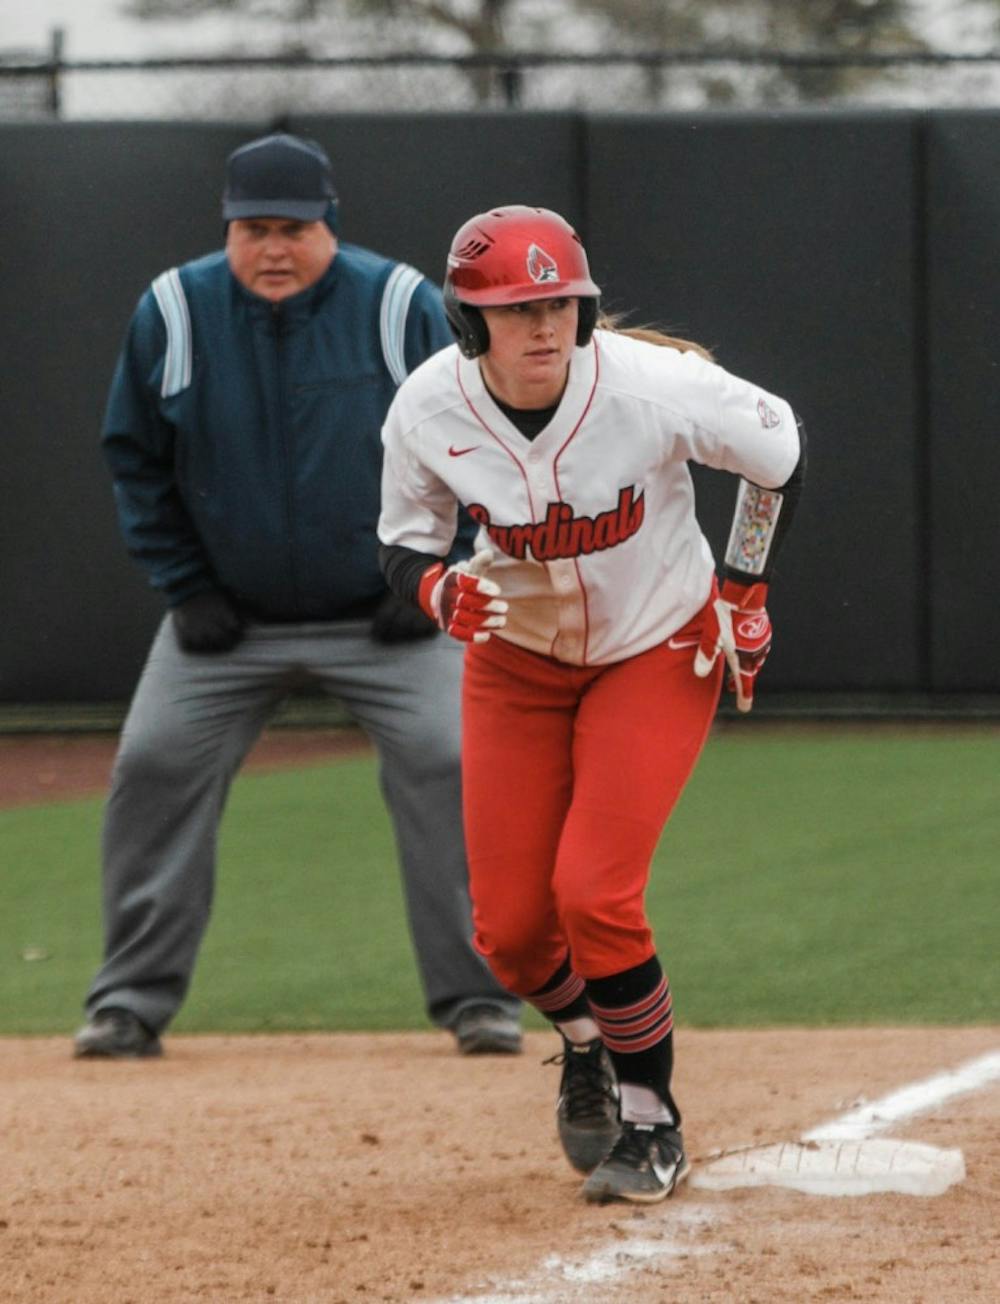 Ball State's softball team competed in a doubleheader against Kent State at the Softball Fields in First Merchants Ballpark Complex. The Cardinals lost the first game 2-5 and won the second game 15-7.&nbsp;